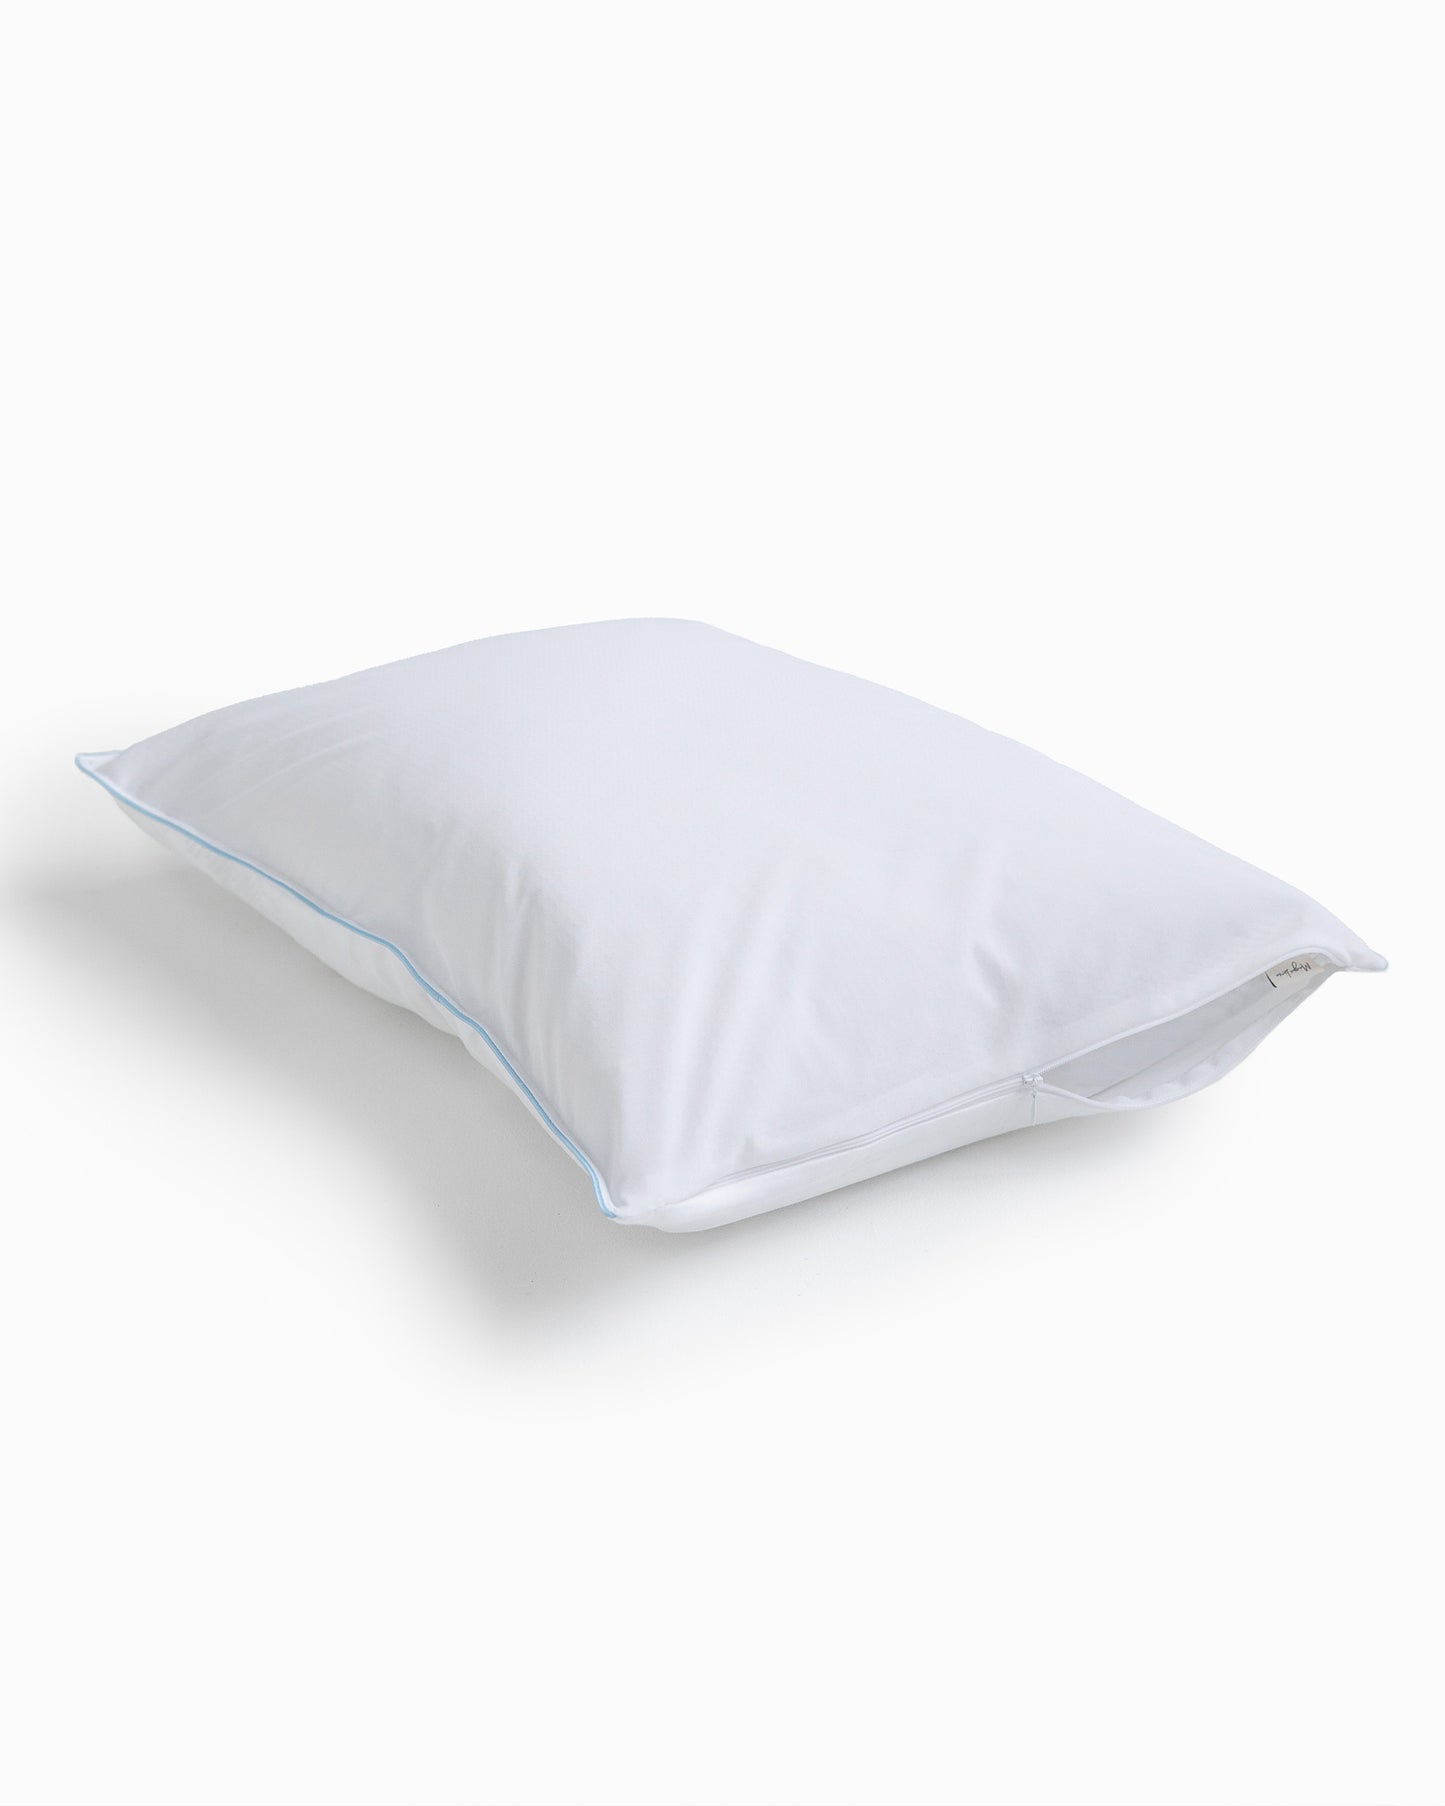 Down Pillow Protector - sneakstylesanctums